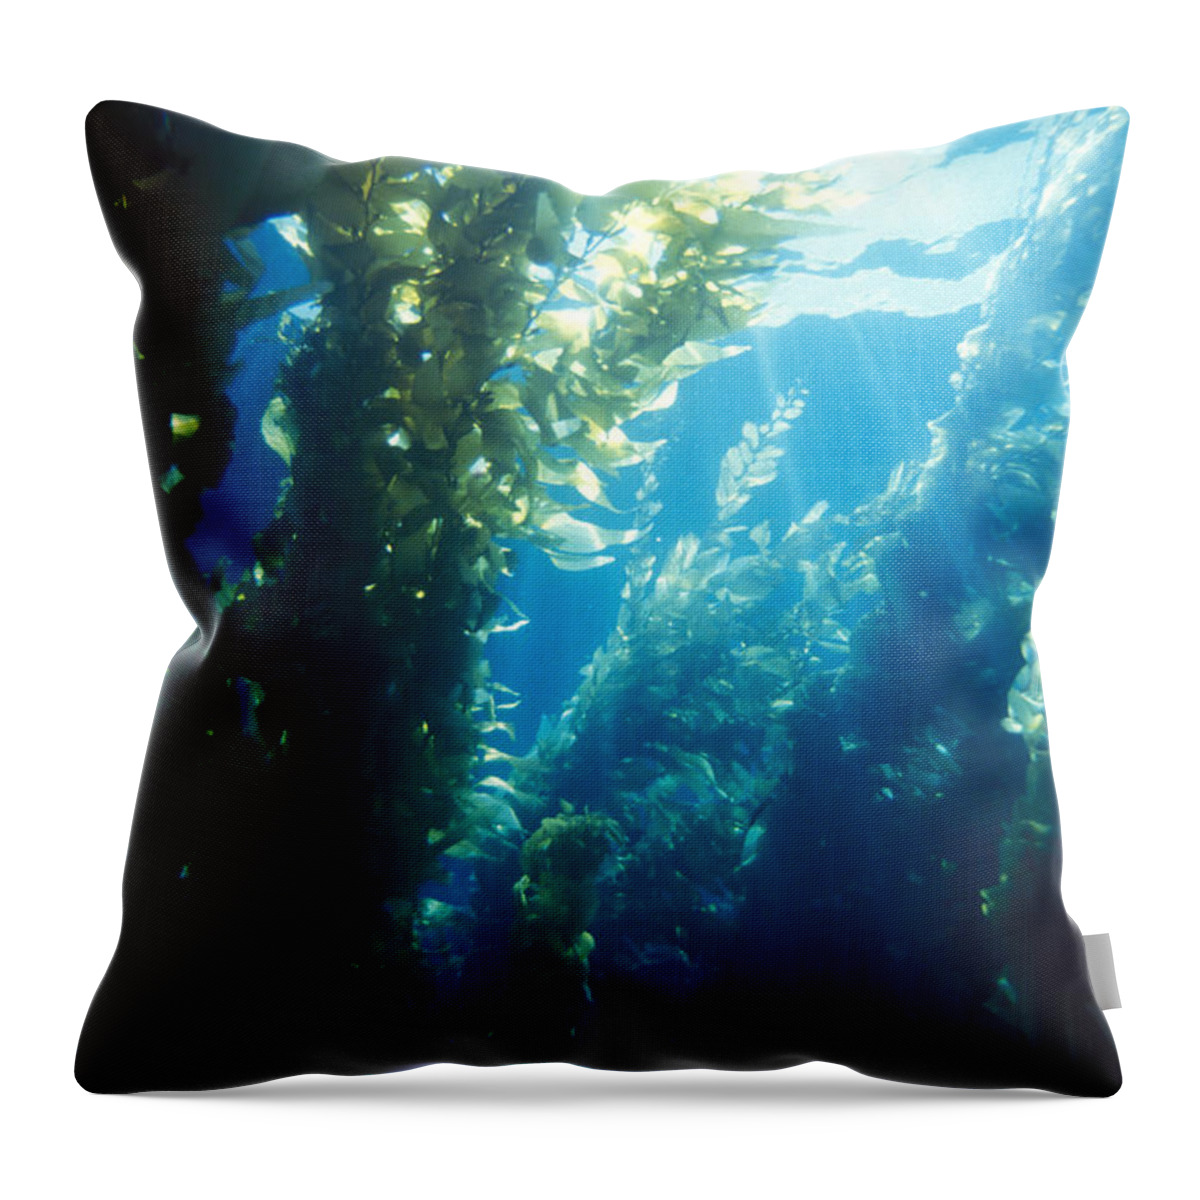 Algae Throw Pillow featuring the photograph Forest Of Giant Kelp by Greg Ochocki